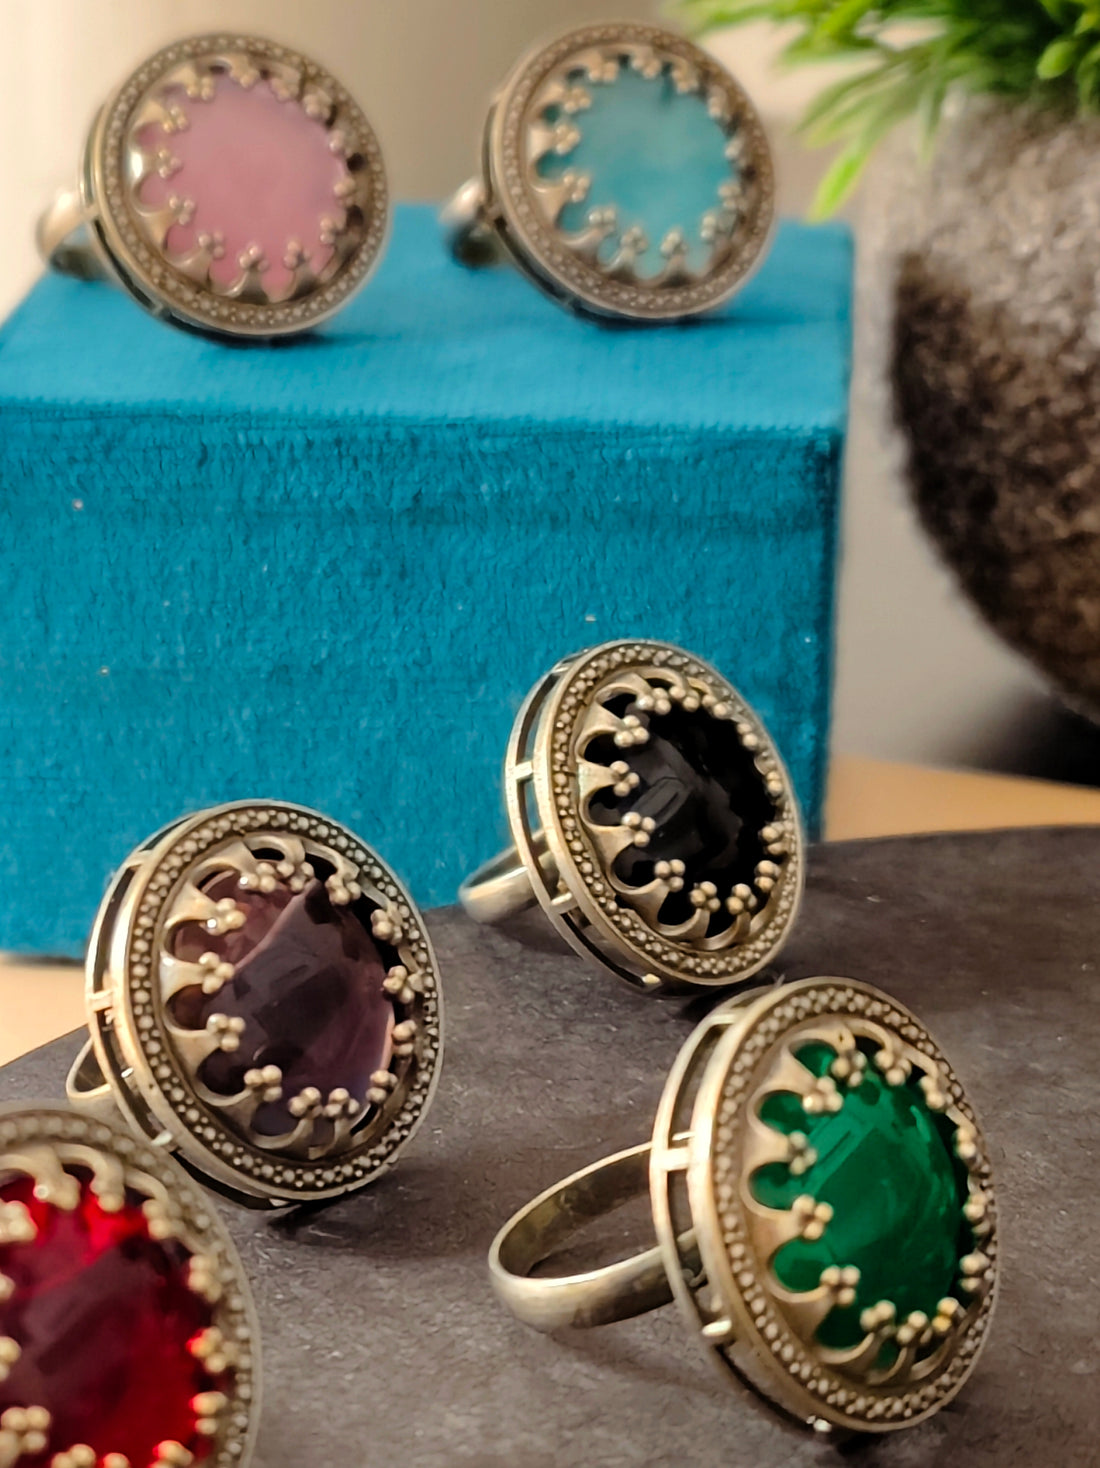 Aganya Multi Color Adjustable Rings with Antique Finish and Big Stone | Festive Occasions | for Traditional Look | for Office Indian Look - Mrigaya India